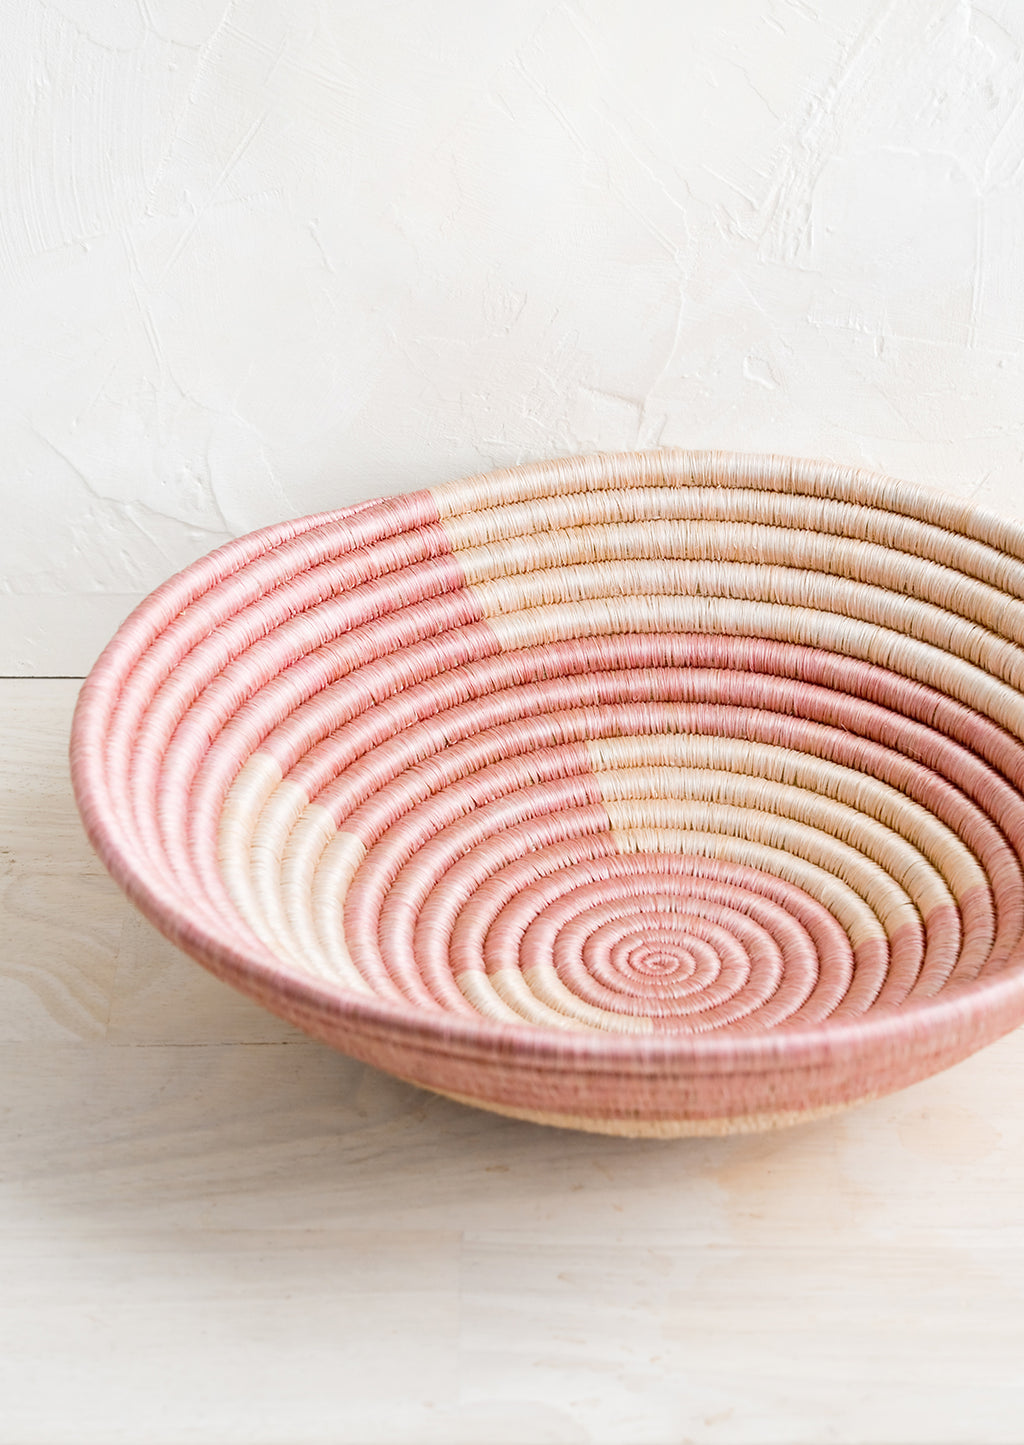 2: A woven sweetgrass bowl in geometric pink pattern.